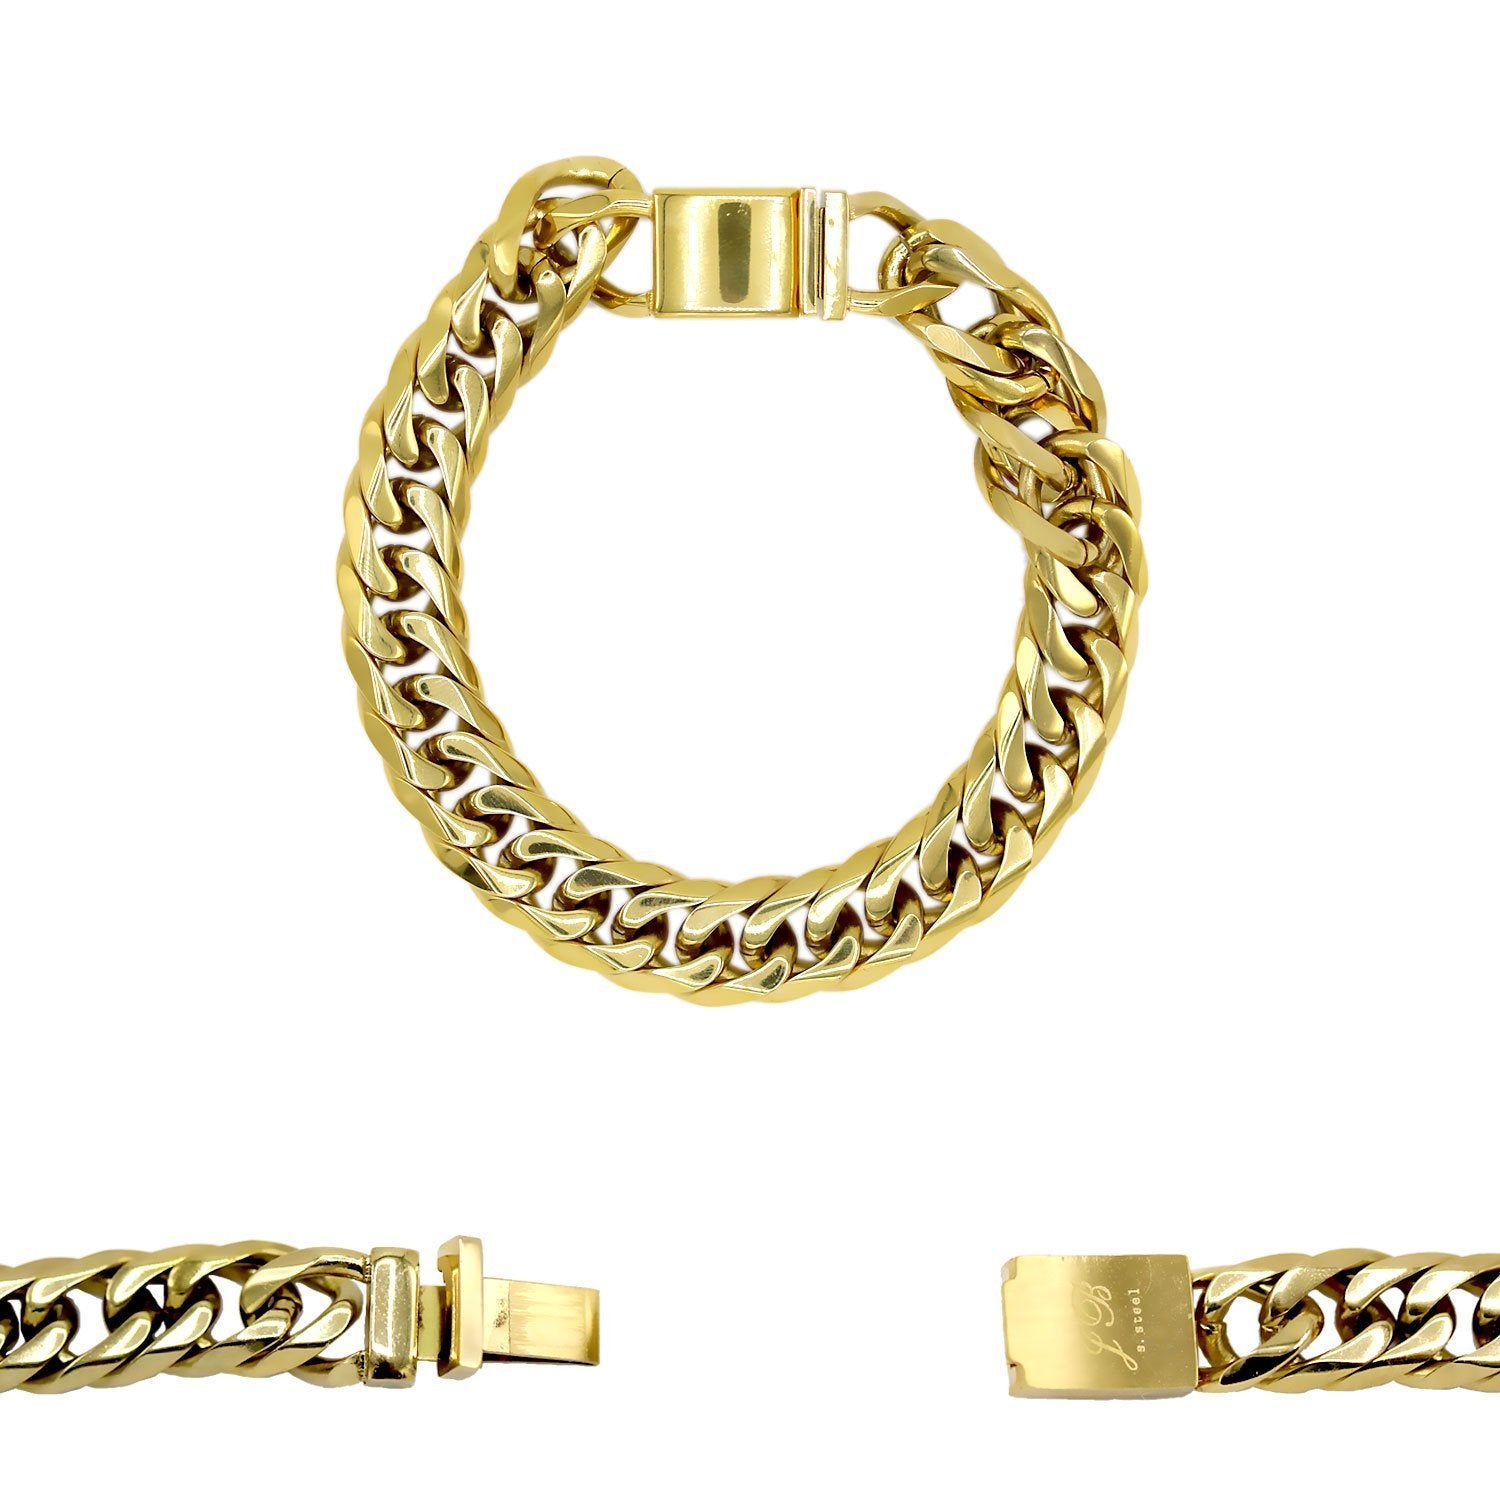 Miami Cuban Link Chain Bracelet 18K Gold Plated Stainless Steel Double Link Men Jewelry